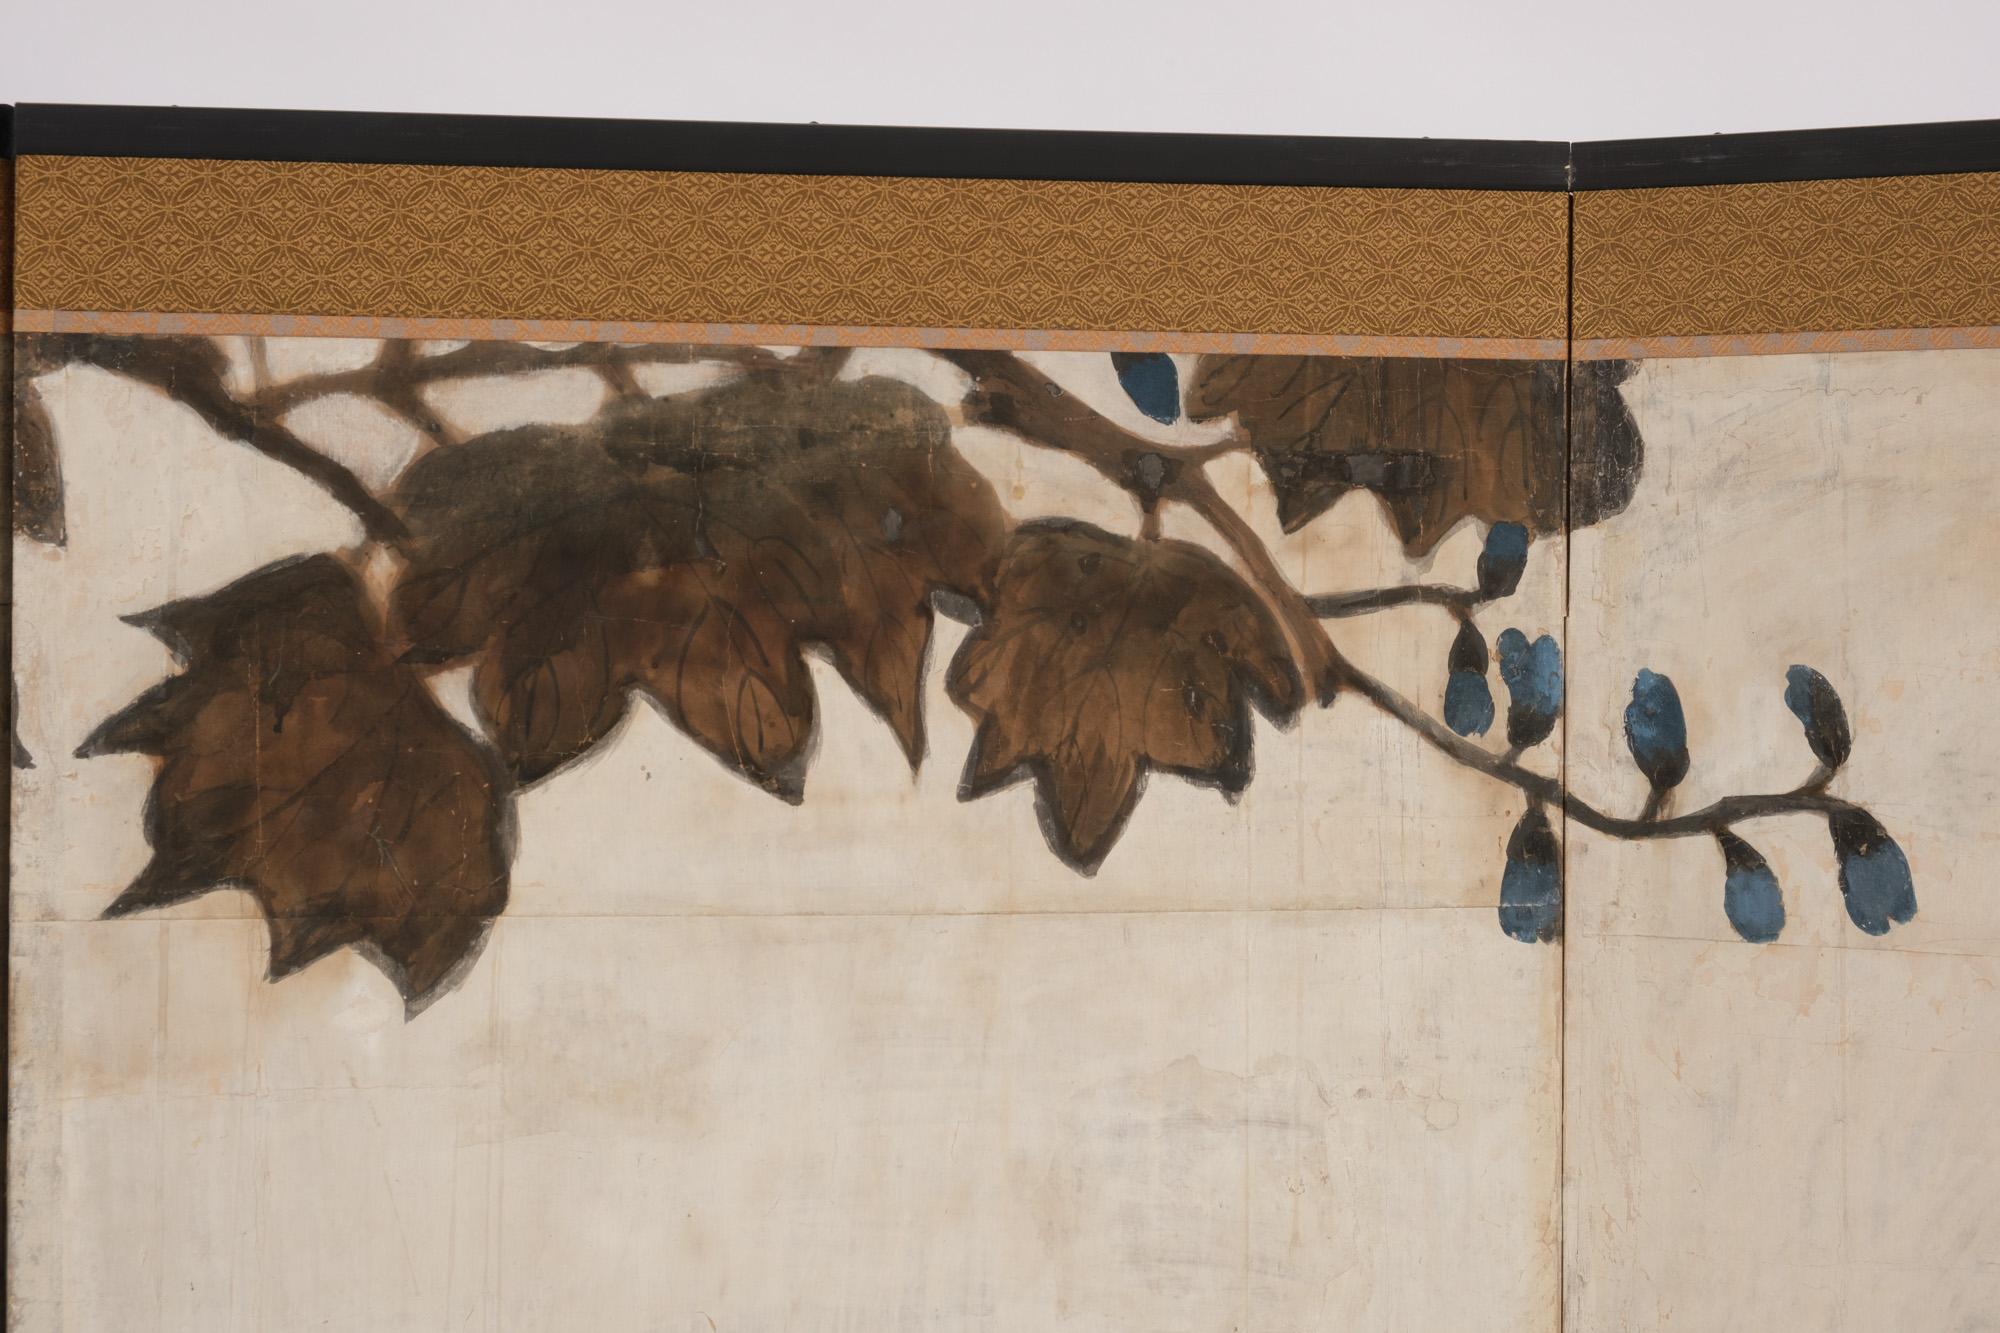 Japanese screen with a painting of an large elephant & monkey by Mori Kanson 森間村 8